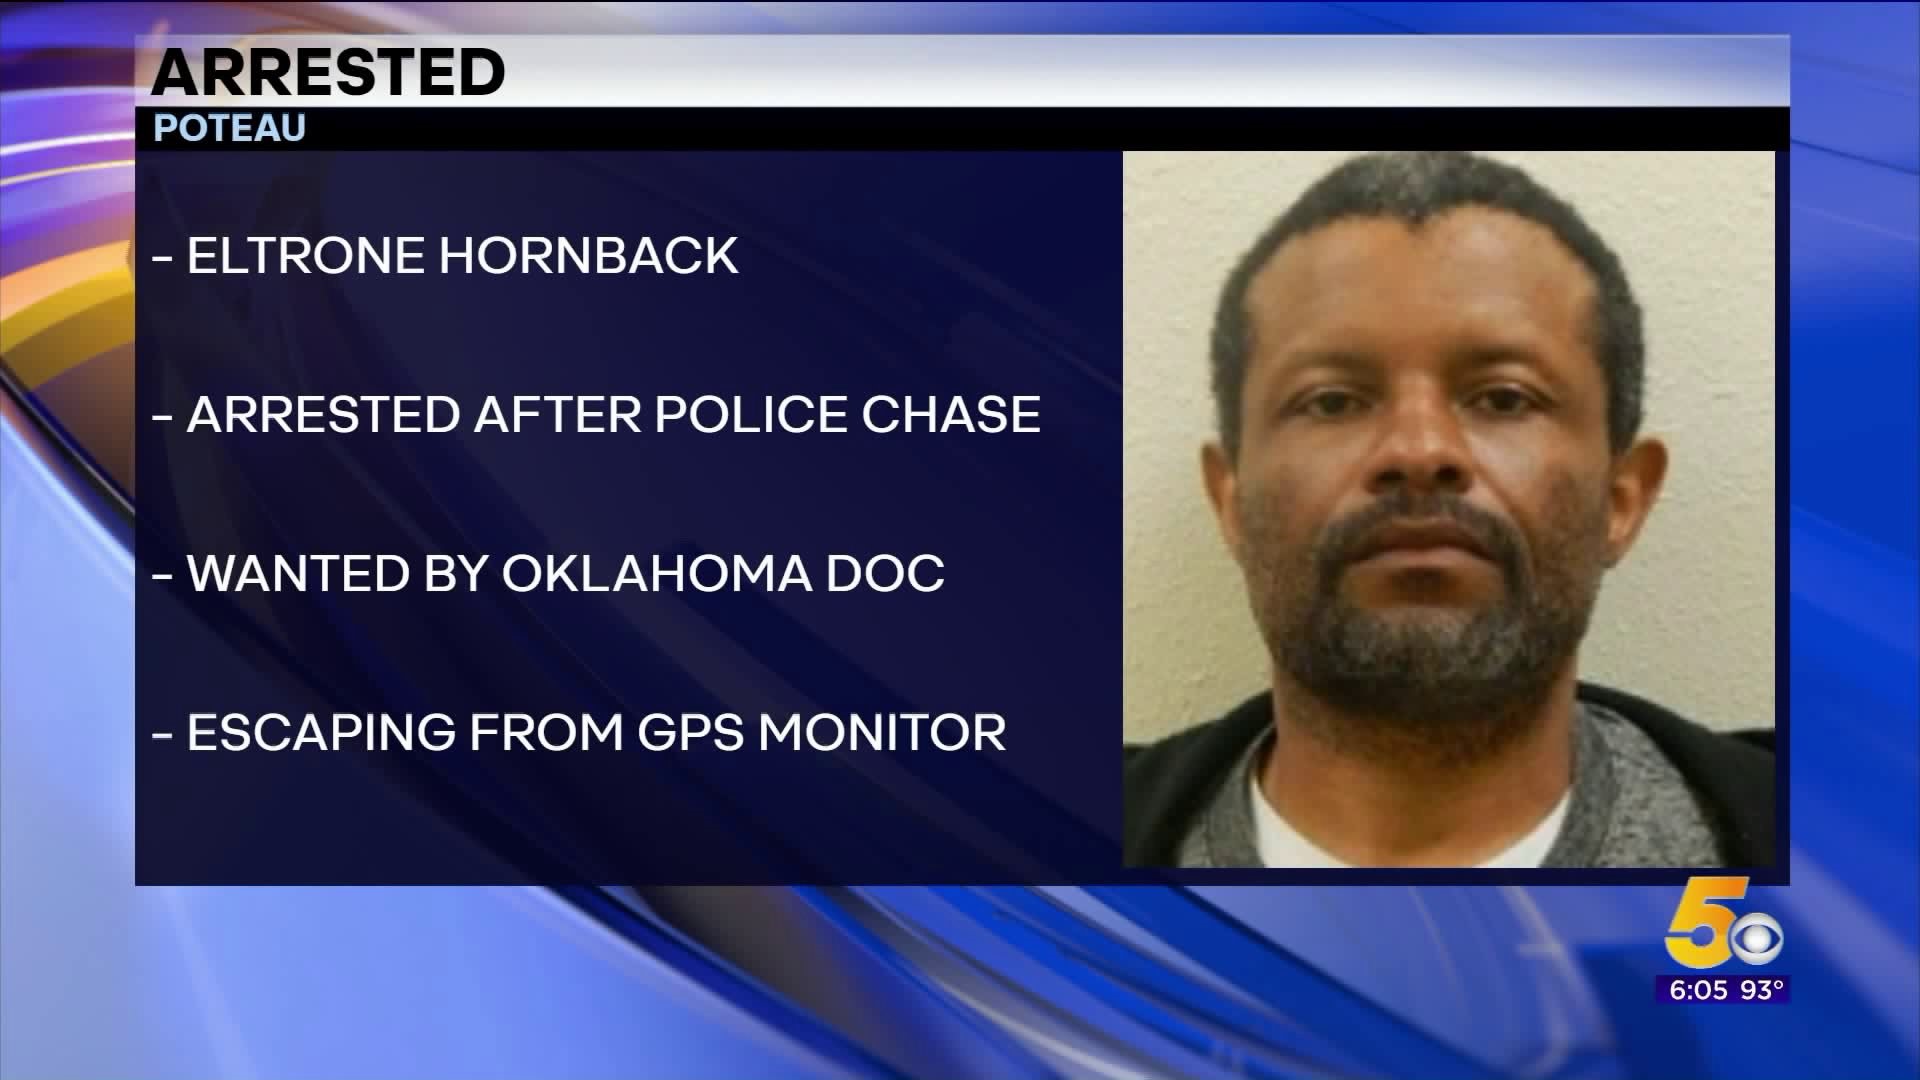 Man Arrested After Police Chase In Poteau